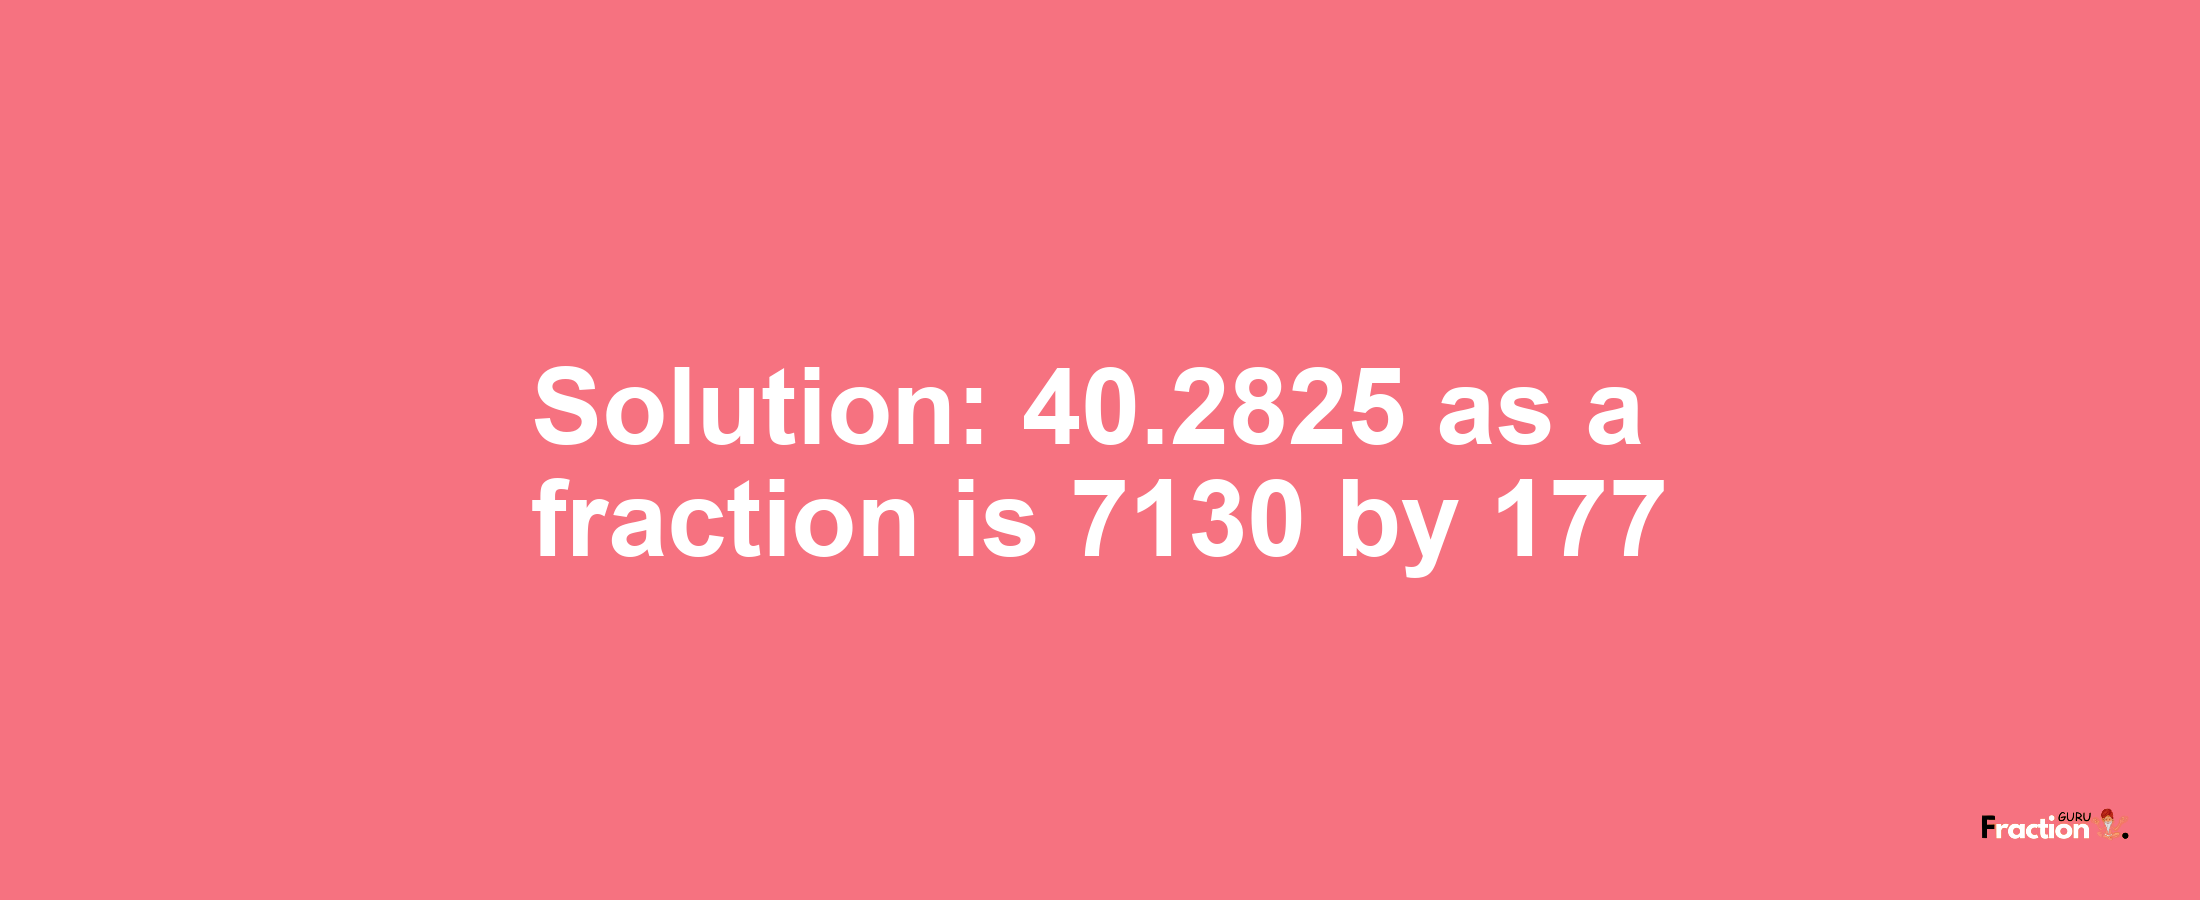 Solution:40.2825 as a fraction is 7130/177